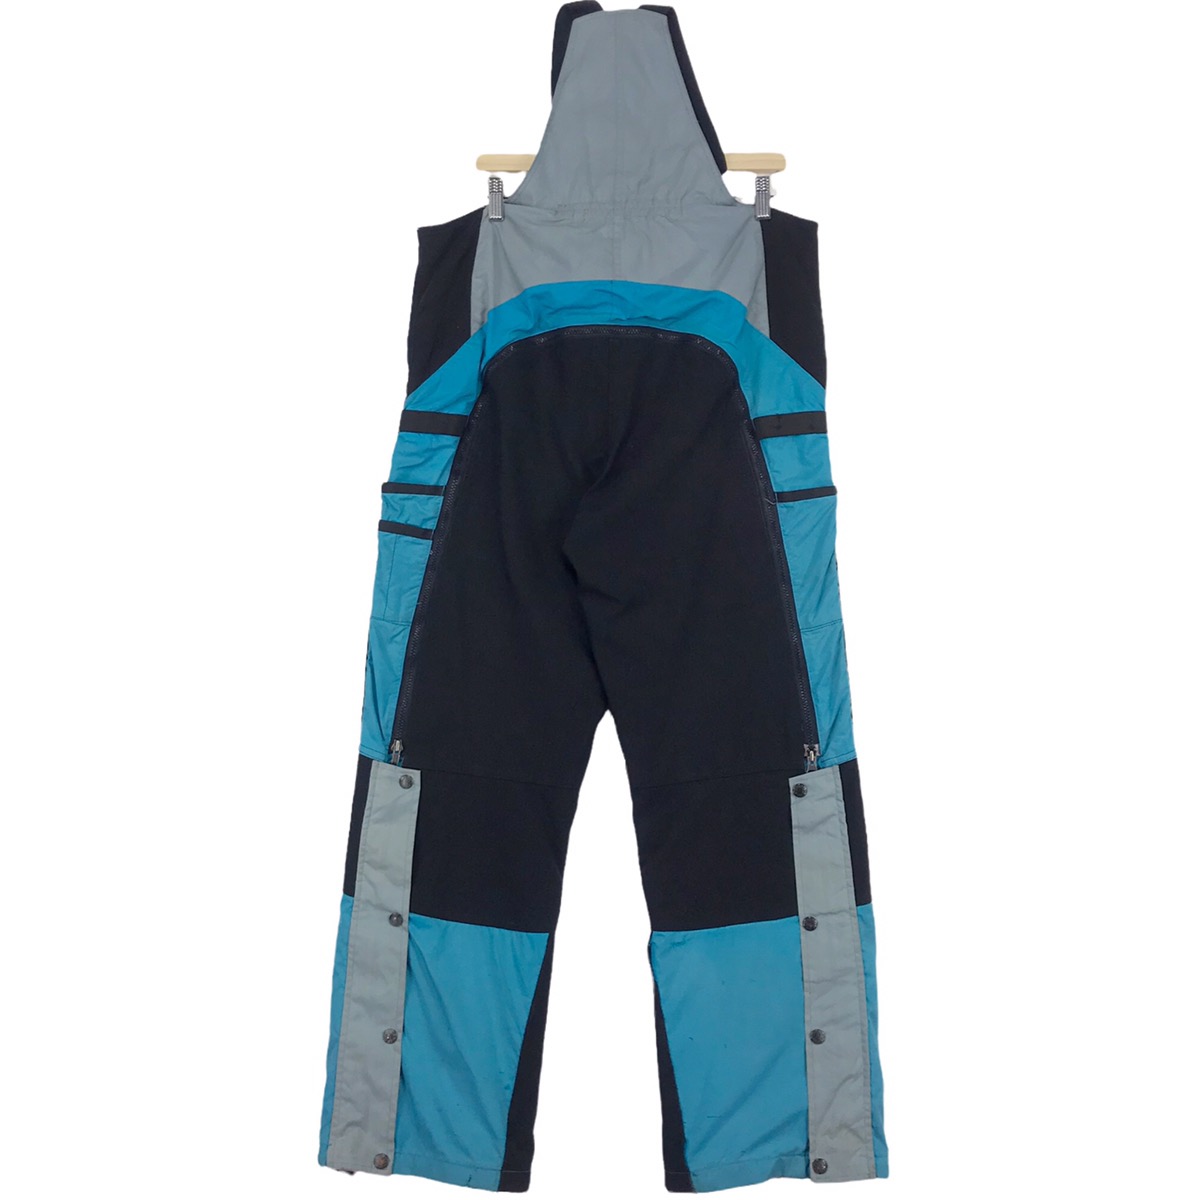 Outdoor Style Go Out! - Vintage The North Face Steep Tech Jumpsuits Ski Pants - 6